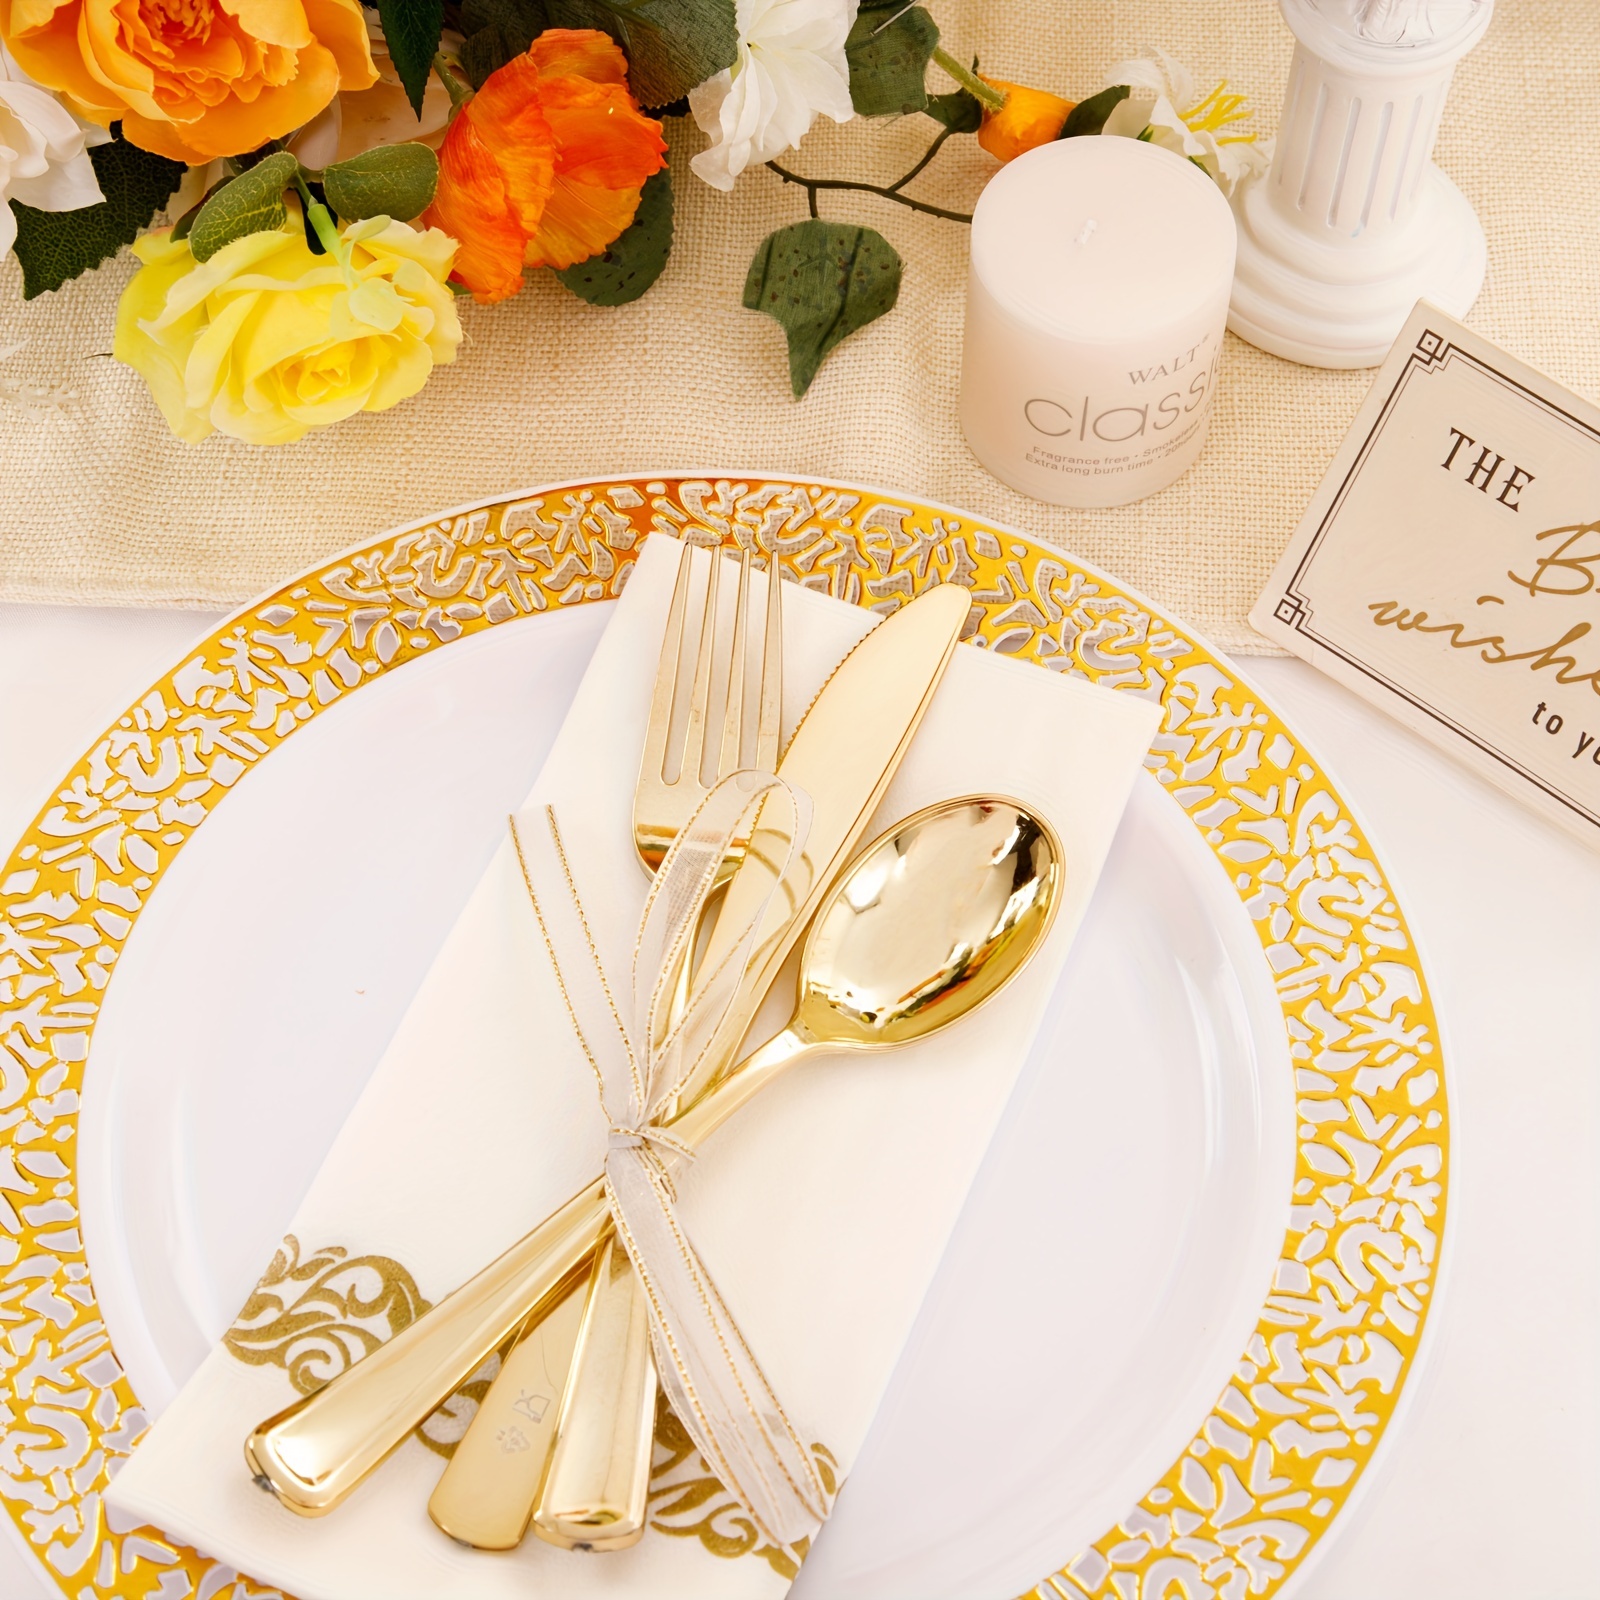 Plateware and Flatware Sets